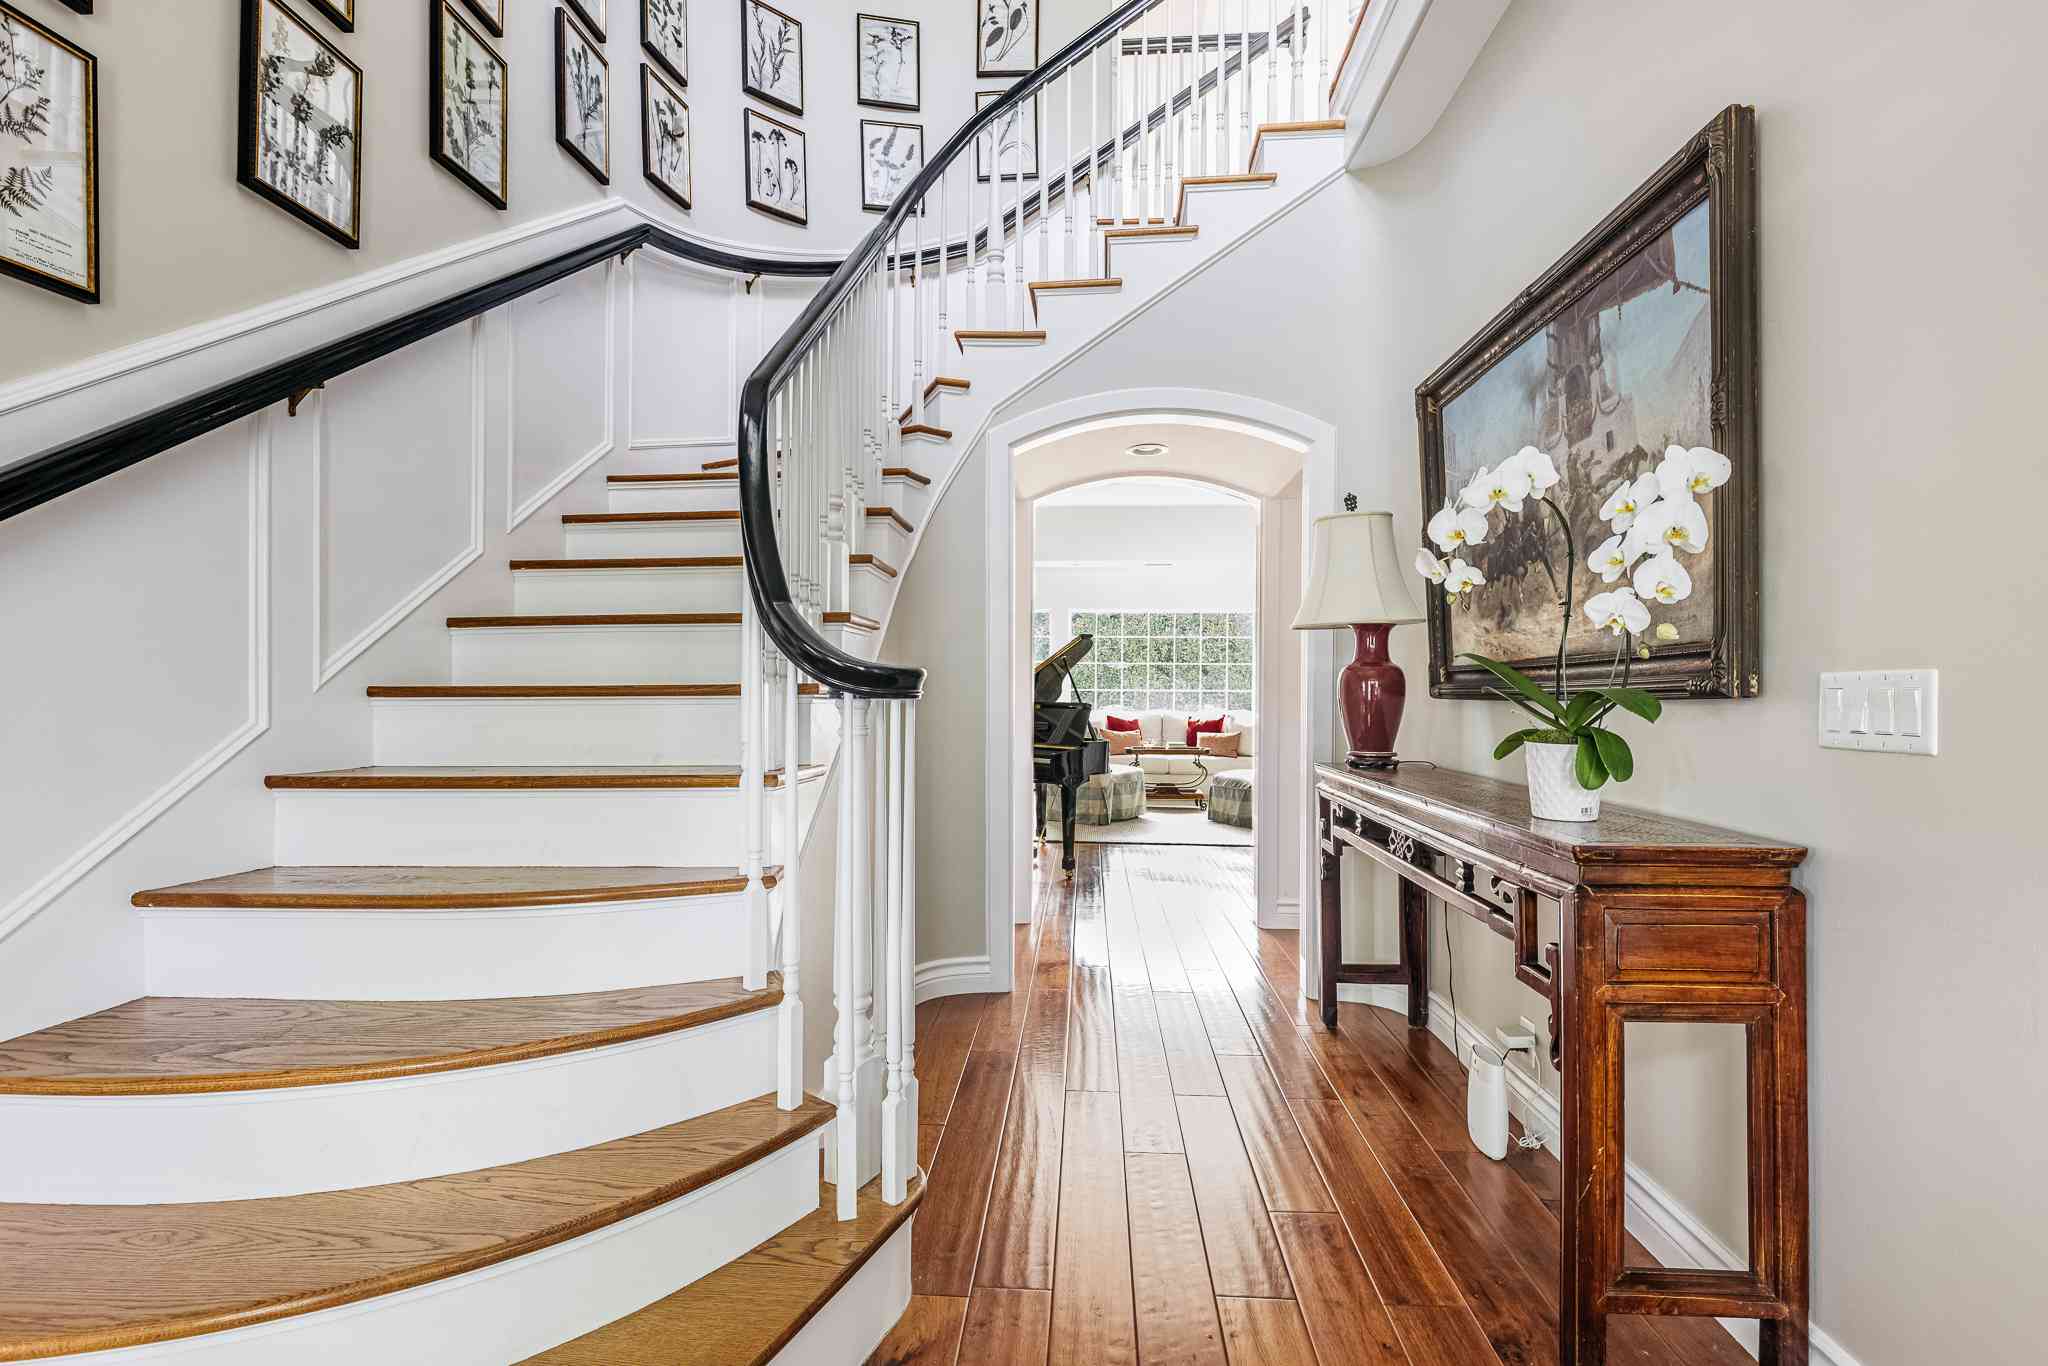 What Are the Top Trends in Stairs Landing Decor for The Current Year?